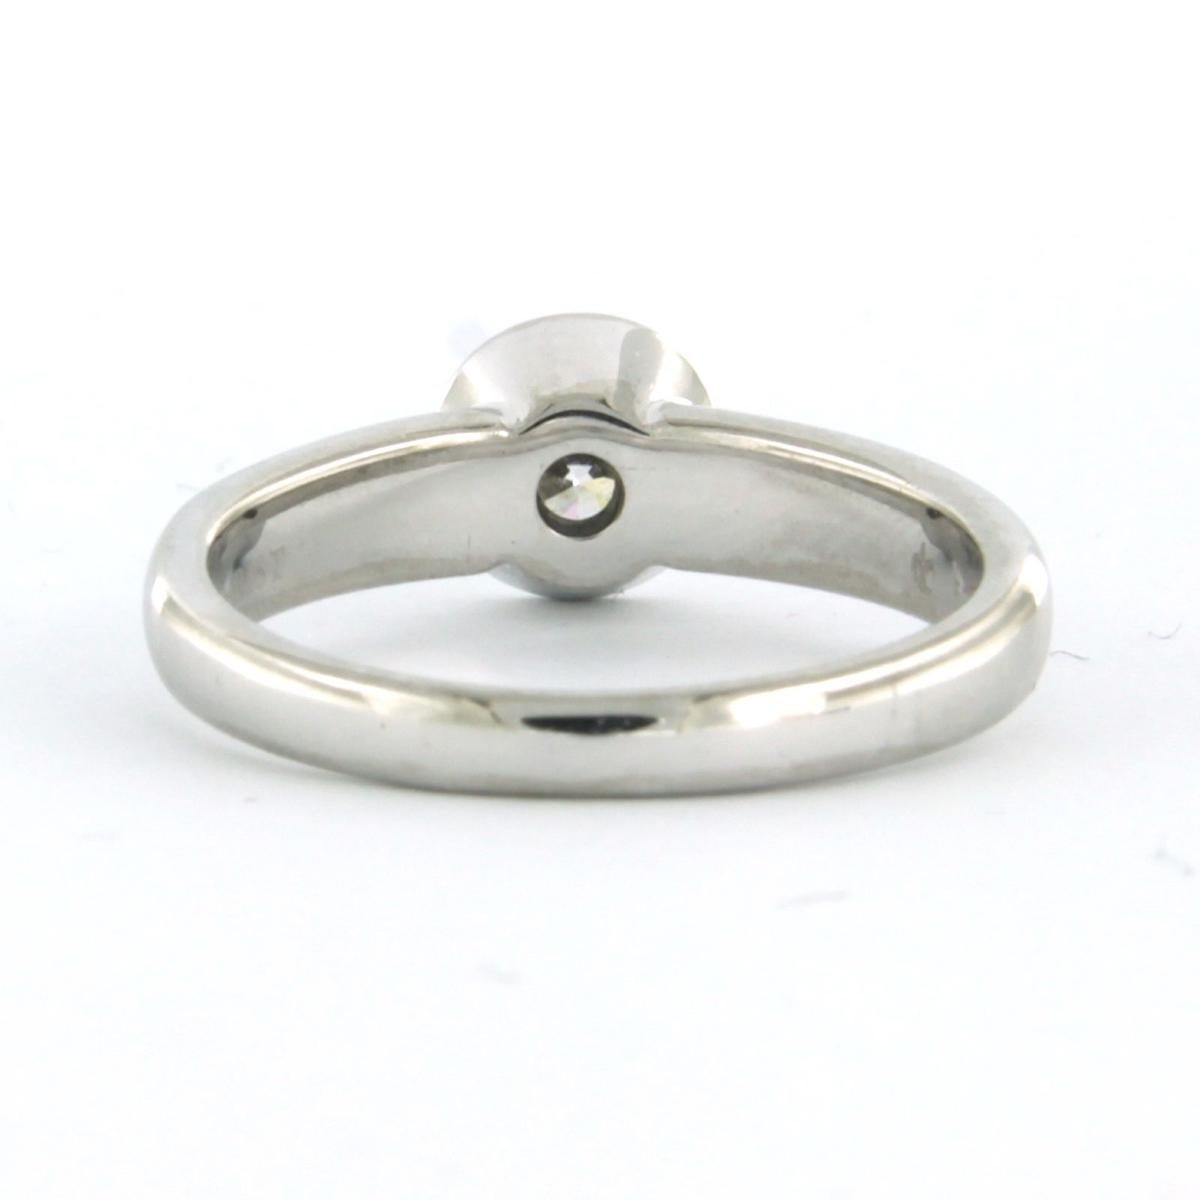 CHRIST - Solitair ring with diamonds 14k white gold In Good Condition For Sale In The Hague, ZH